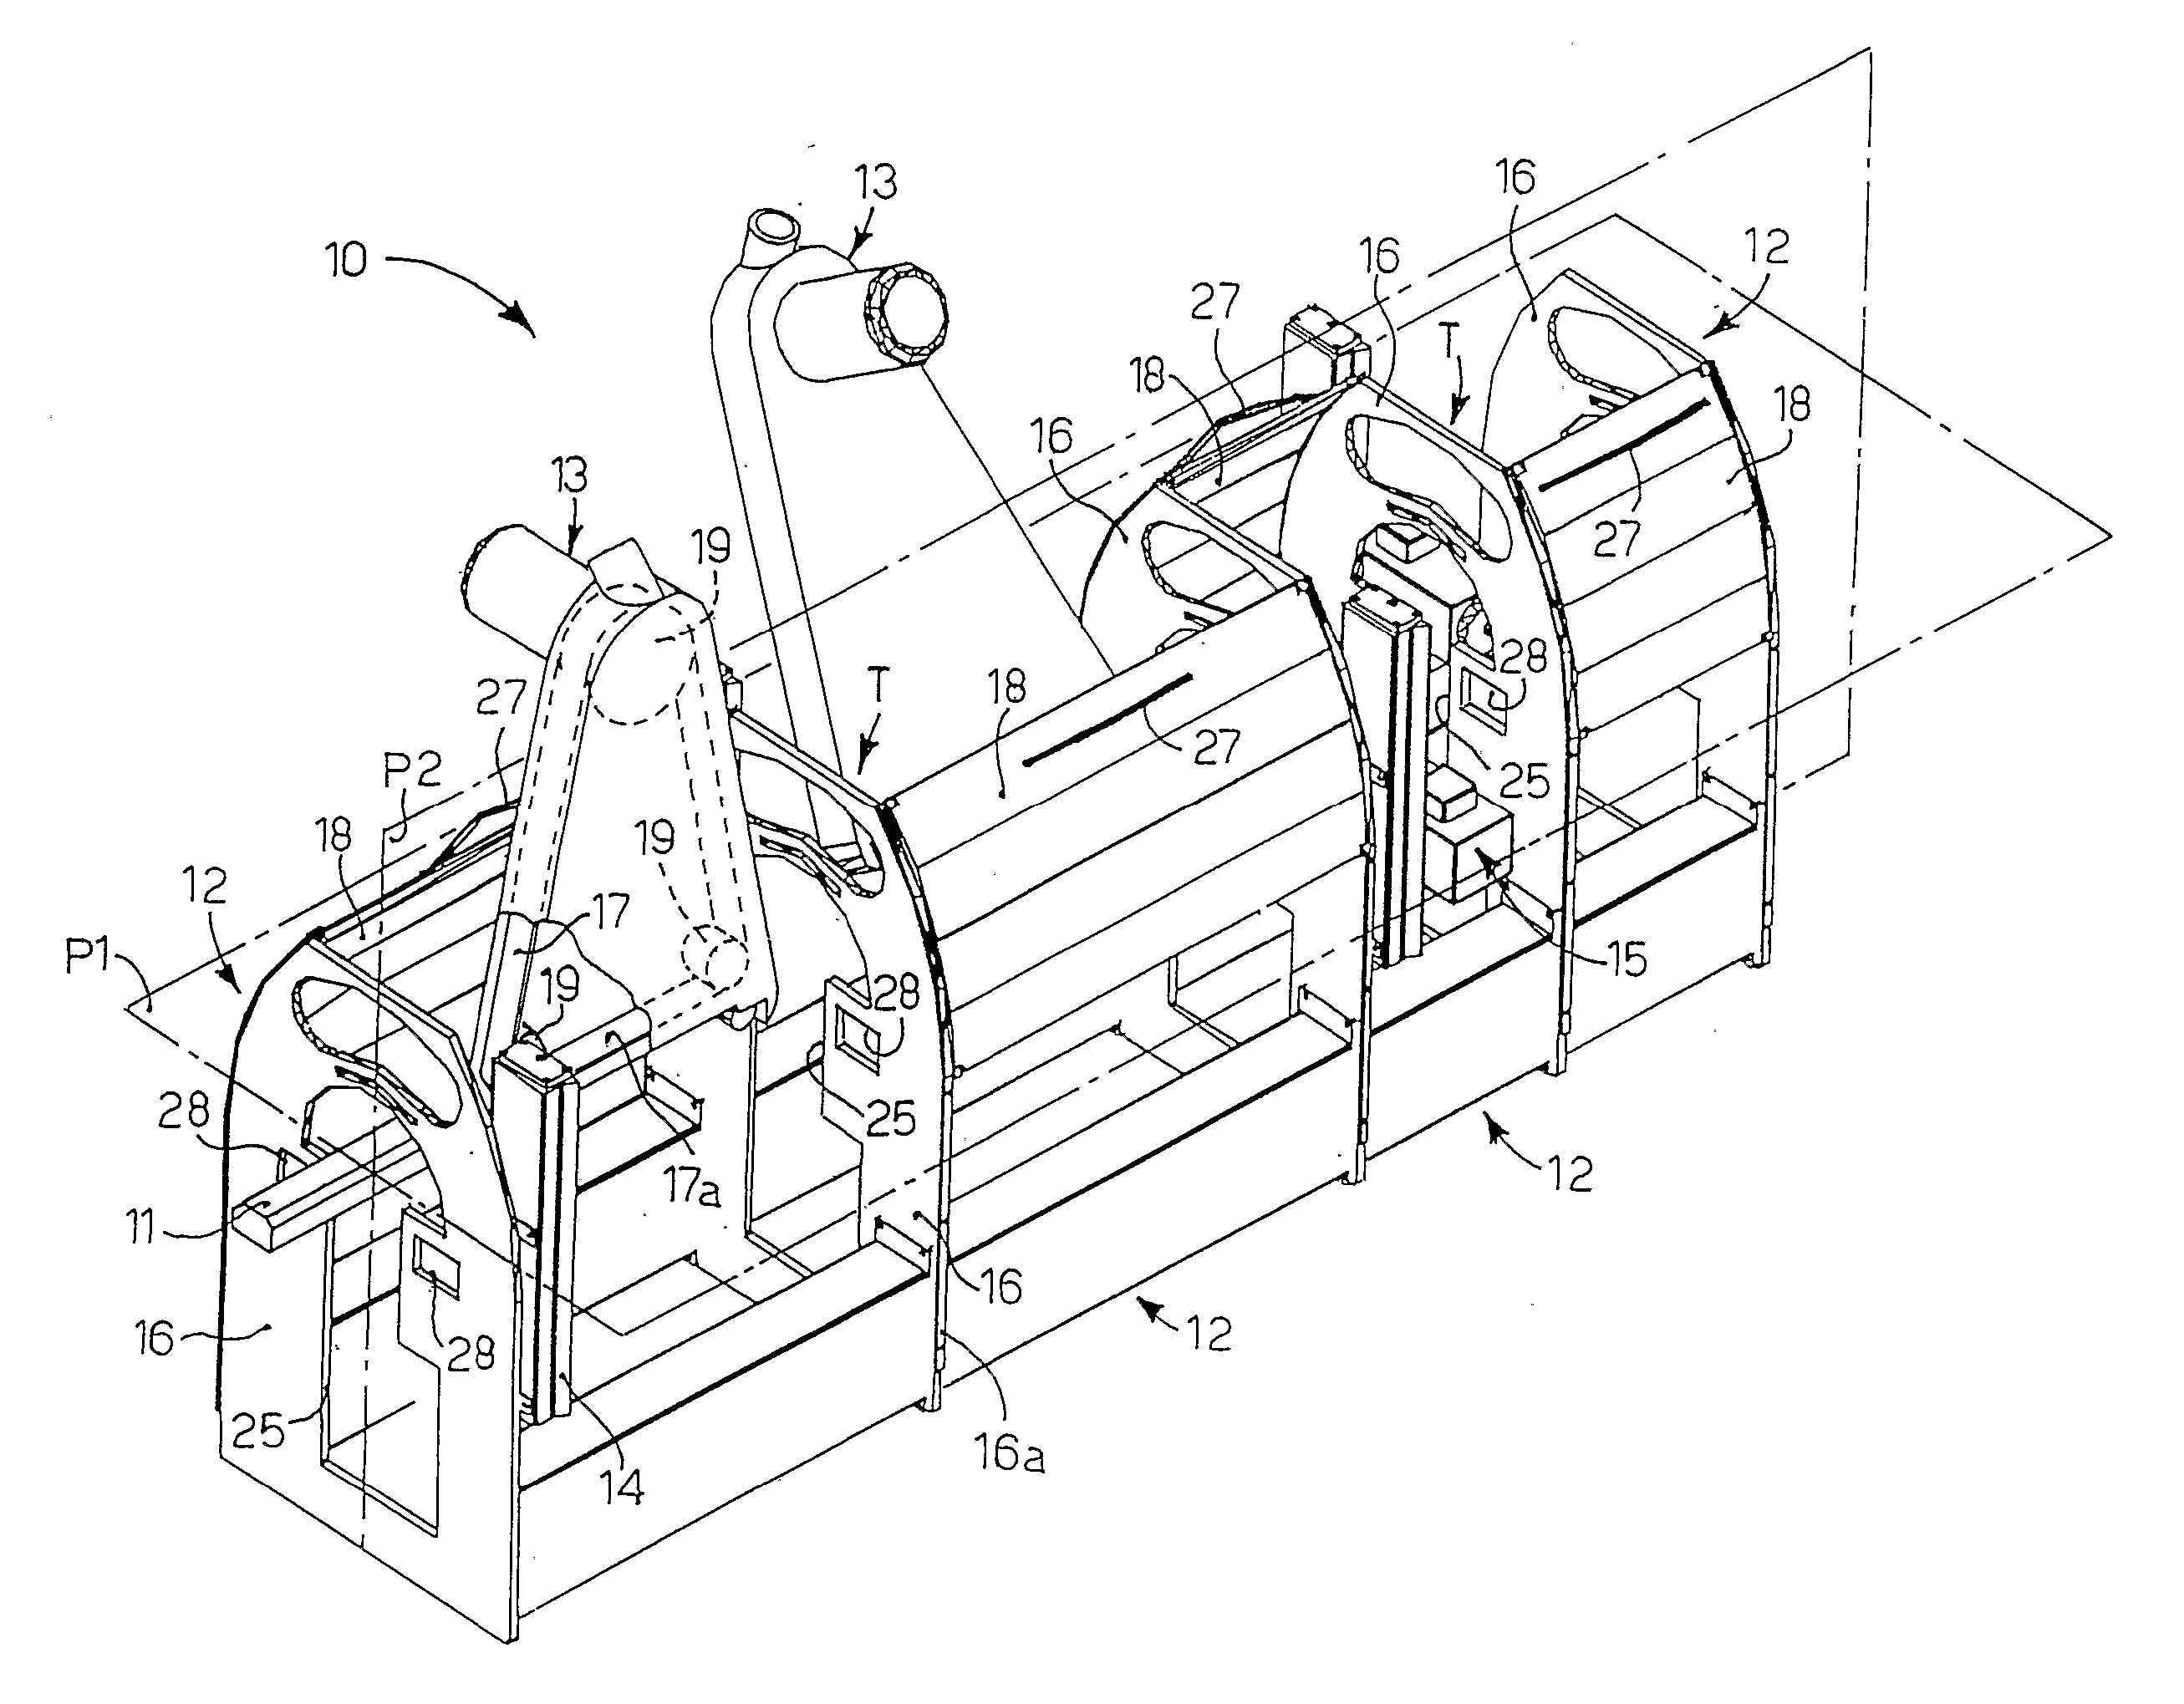 Machine for Finishing an Object Such as a Profiled Element, a Panel, or Suchlike